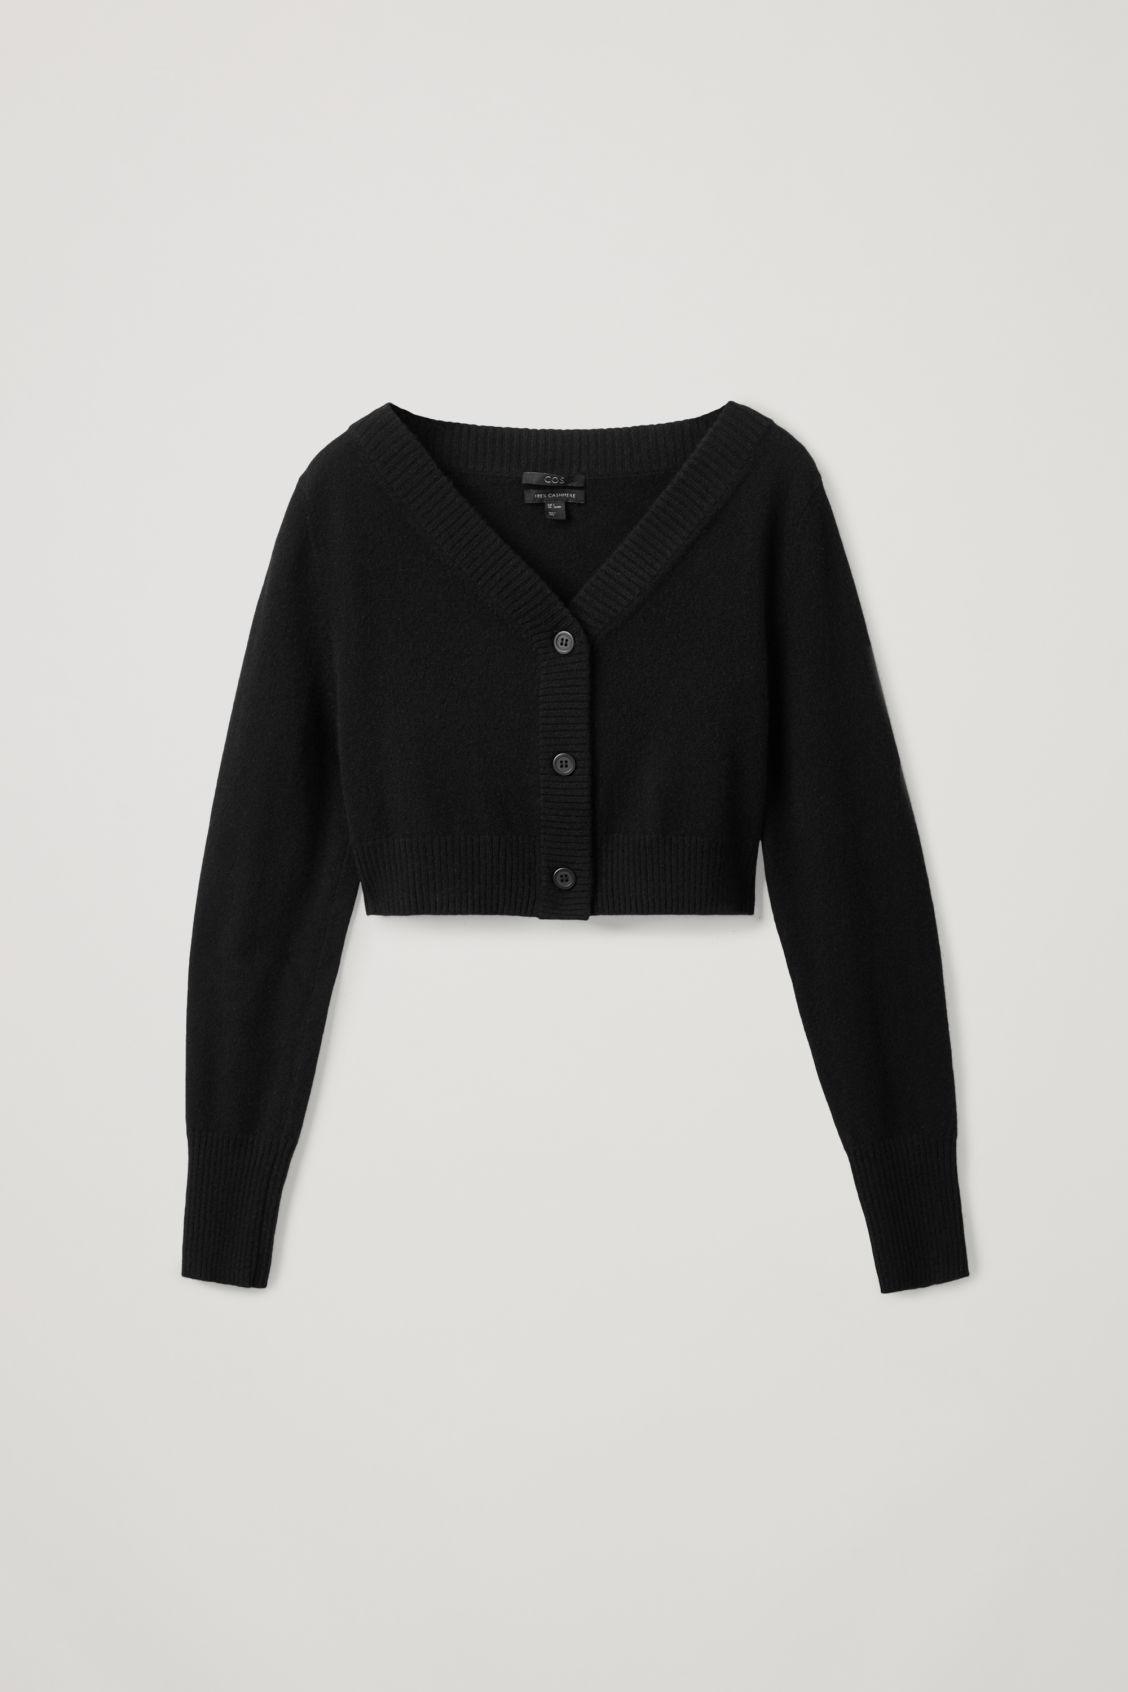 COS Cropped Cashmere Cardigan in Black - Lyst